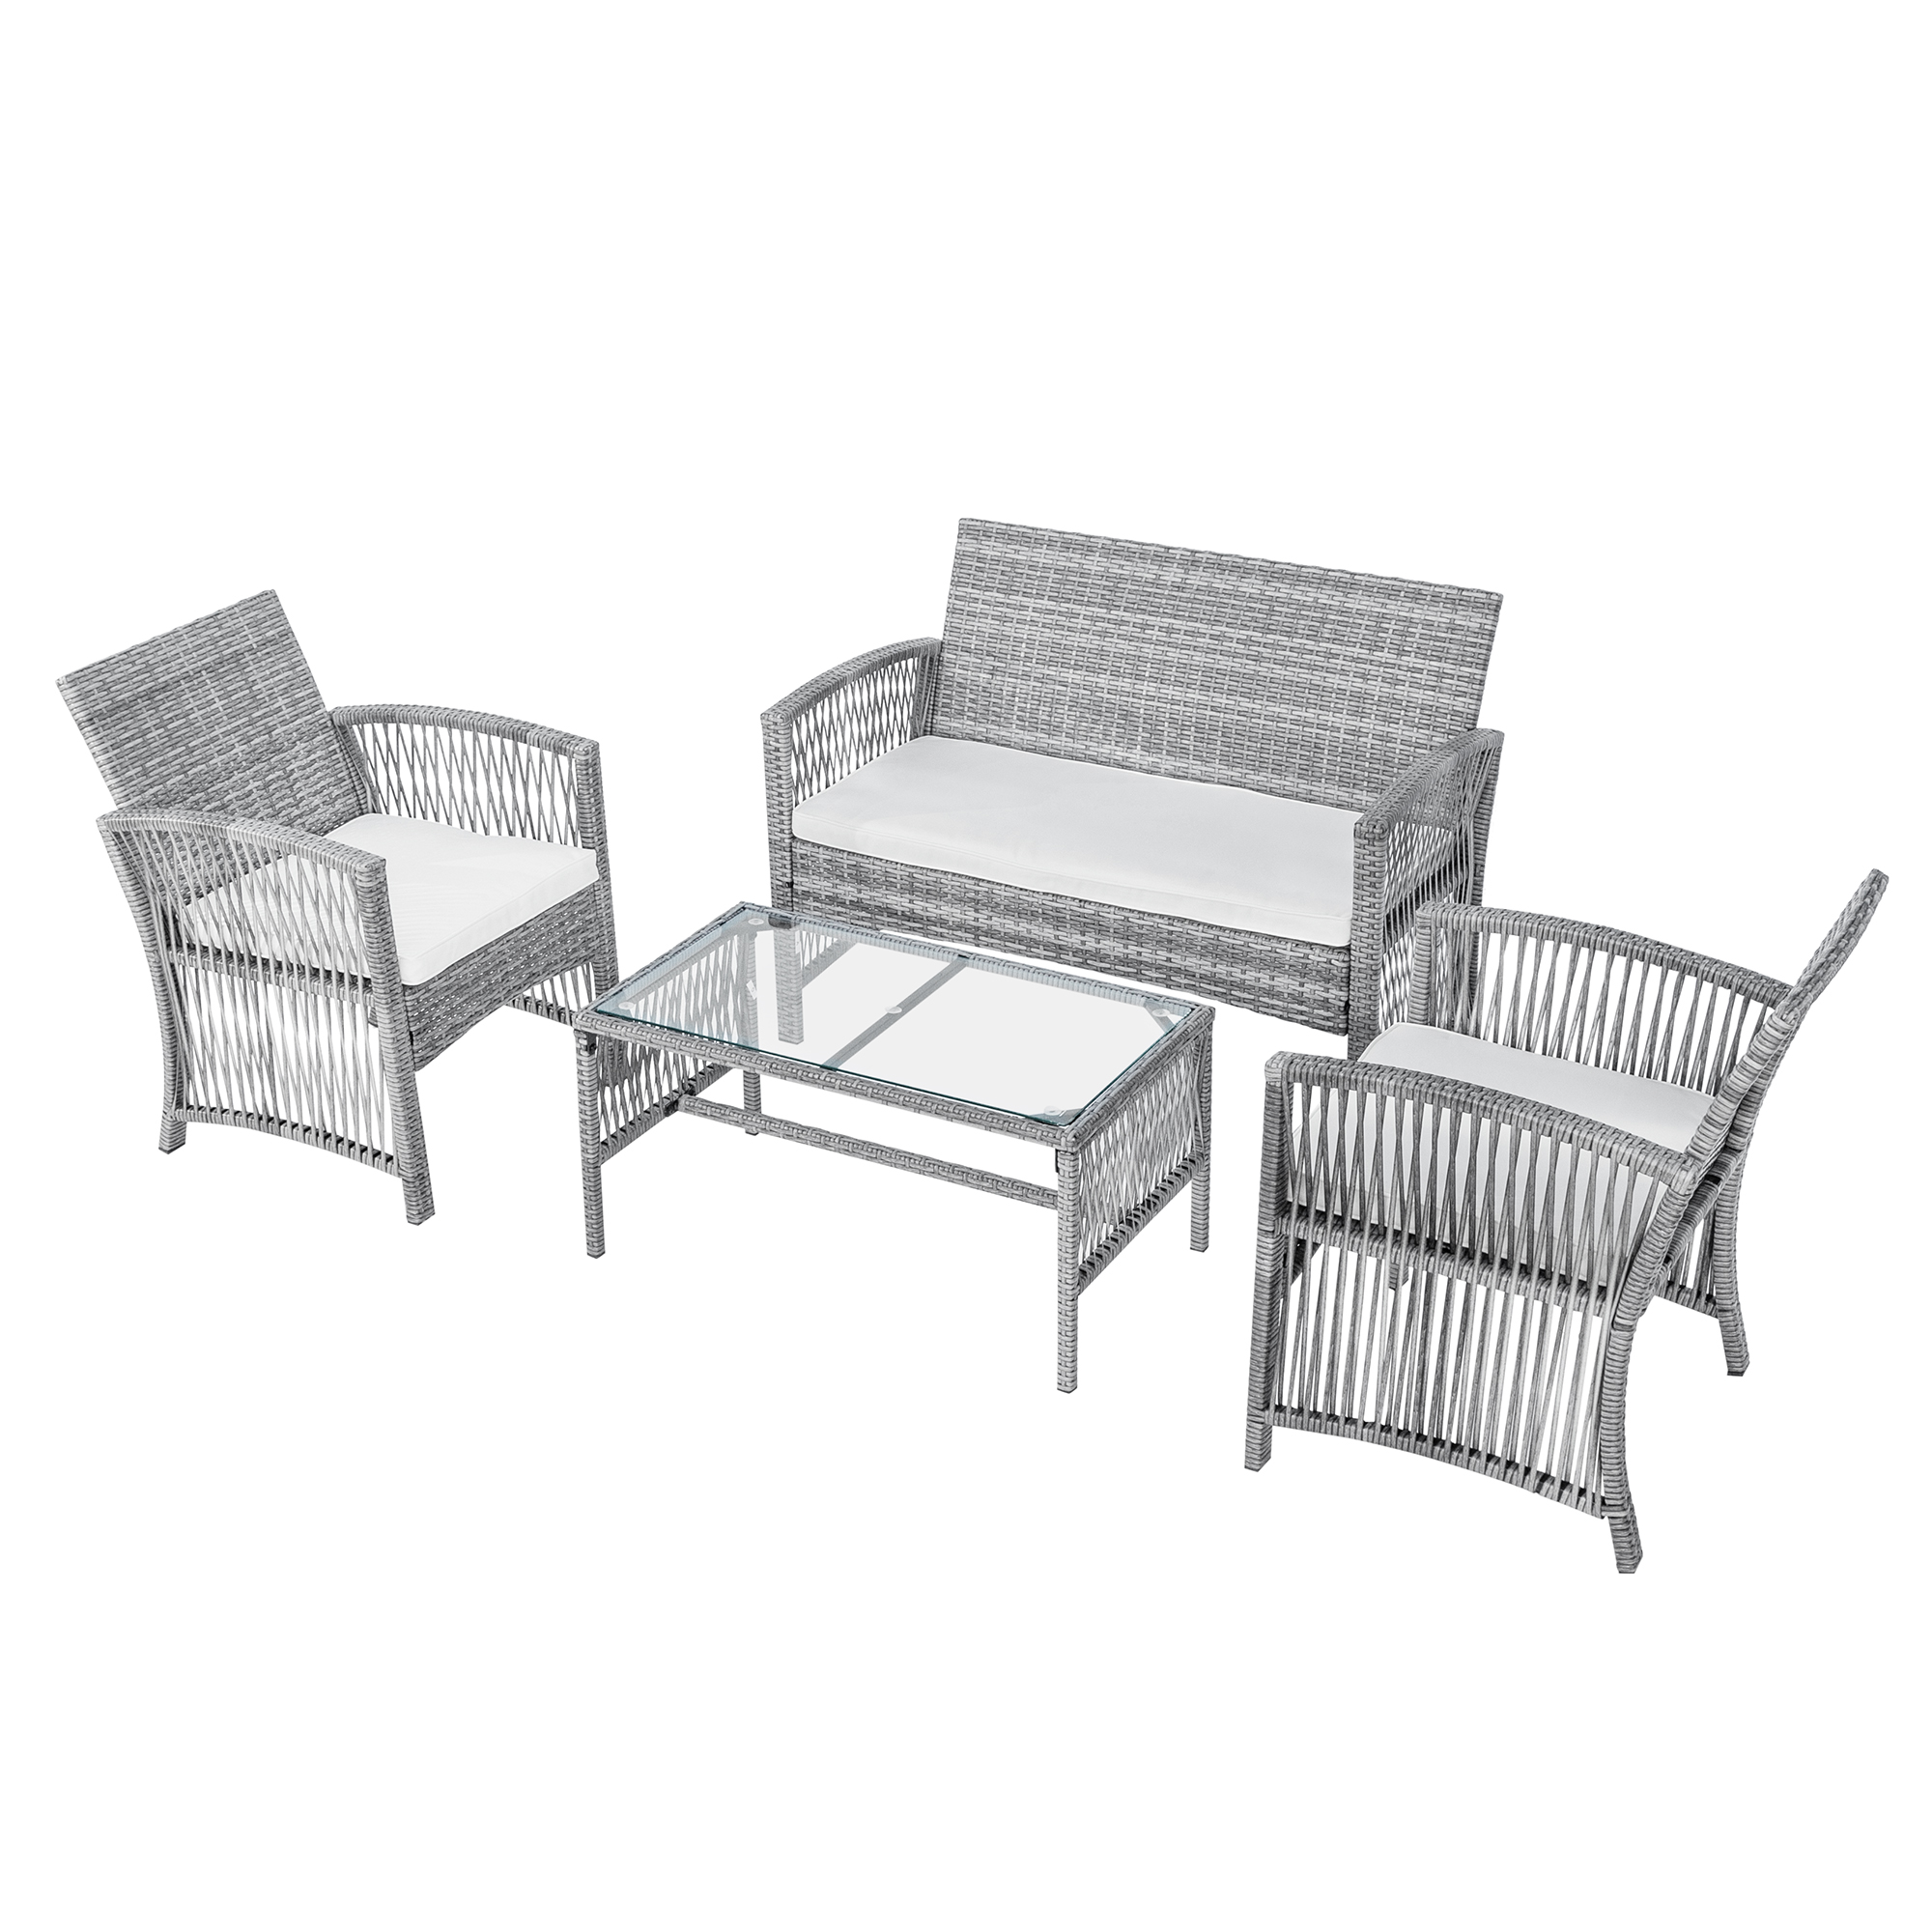 Rattan Patio Furniture Sets Clearance, 4 Piece Outdoor Conversation Sets, Wicker Bar Set with 2 Arm Chairs,1 Loveseat & Coffee Table, Patio Dining Sets for Backyard Porch Poolside Garden, Gray, W7782 - image 4 of 11